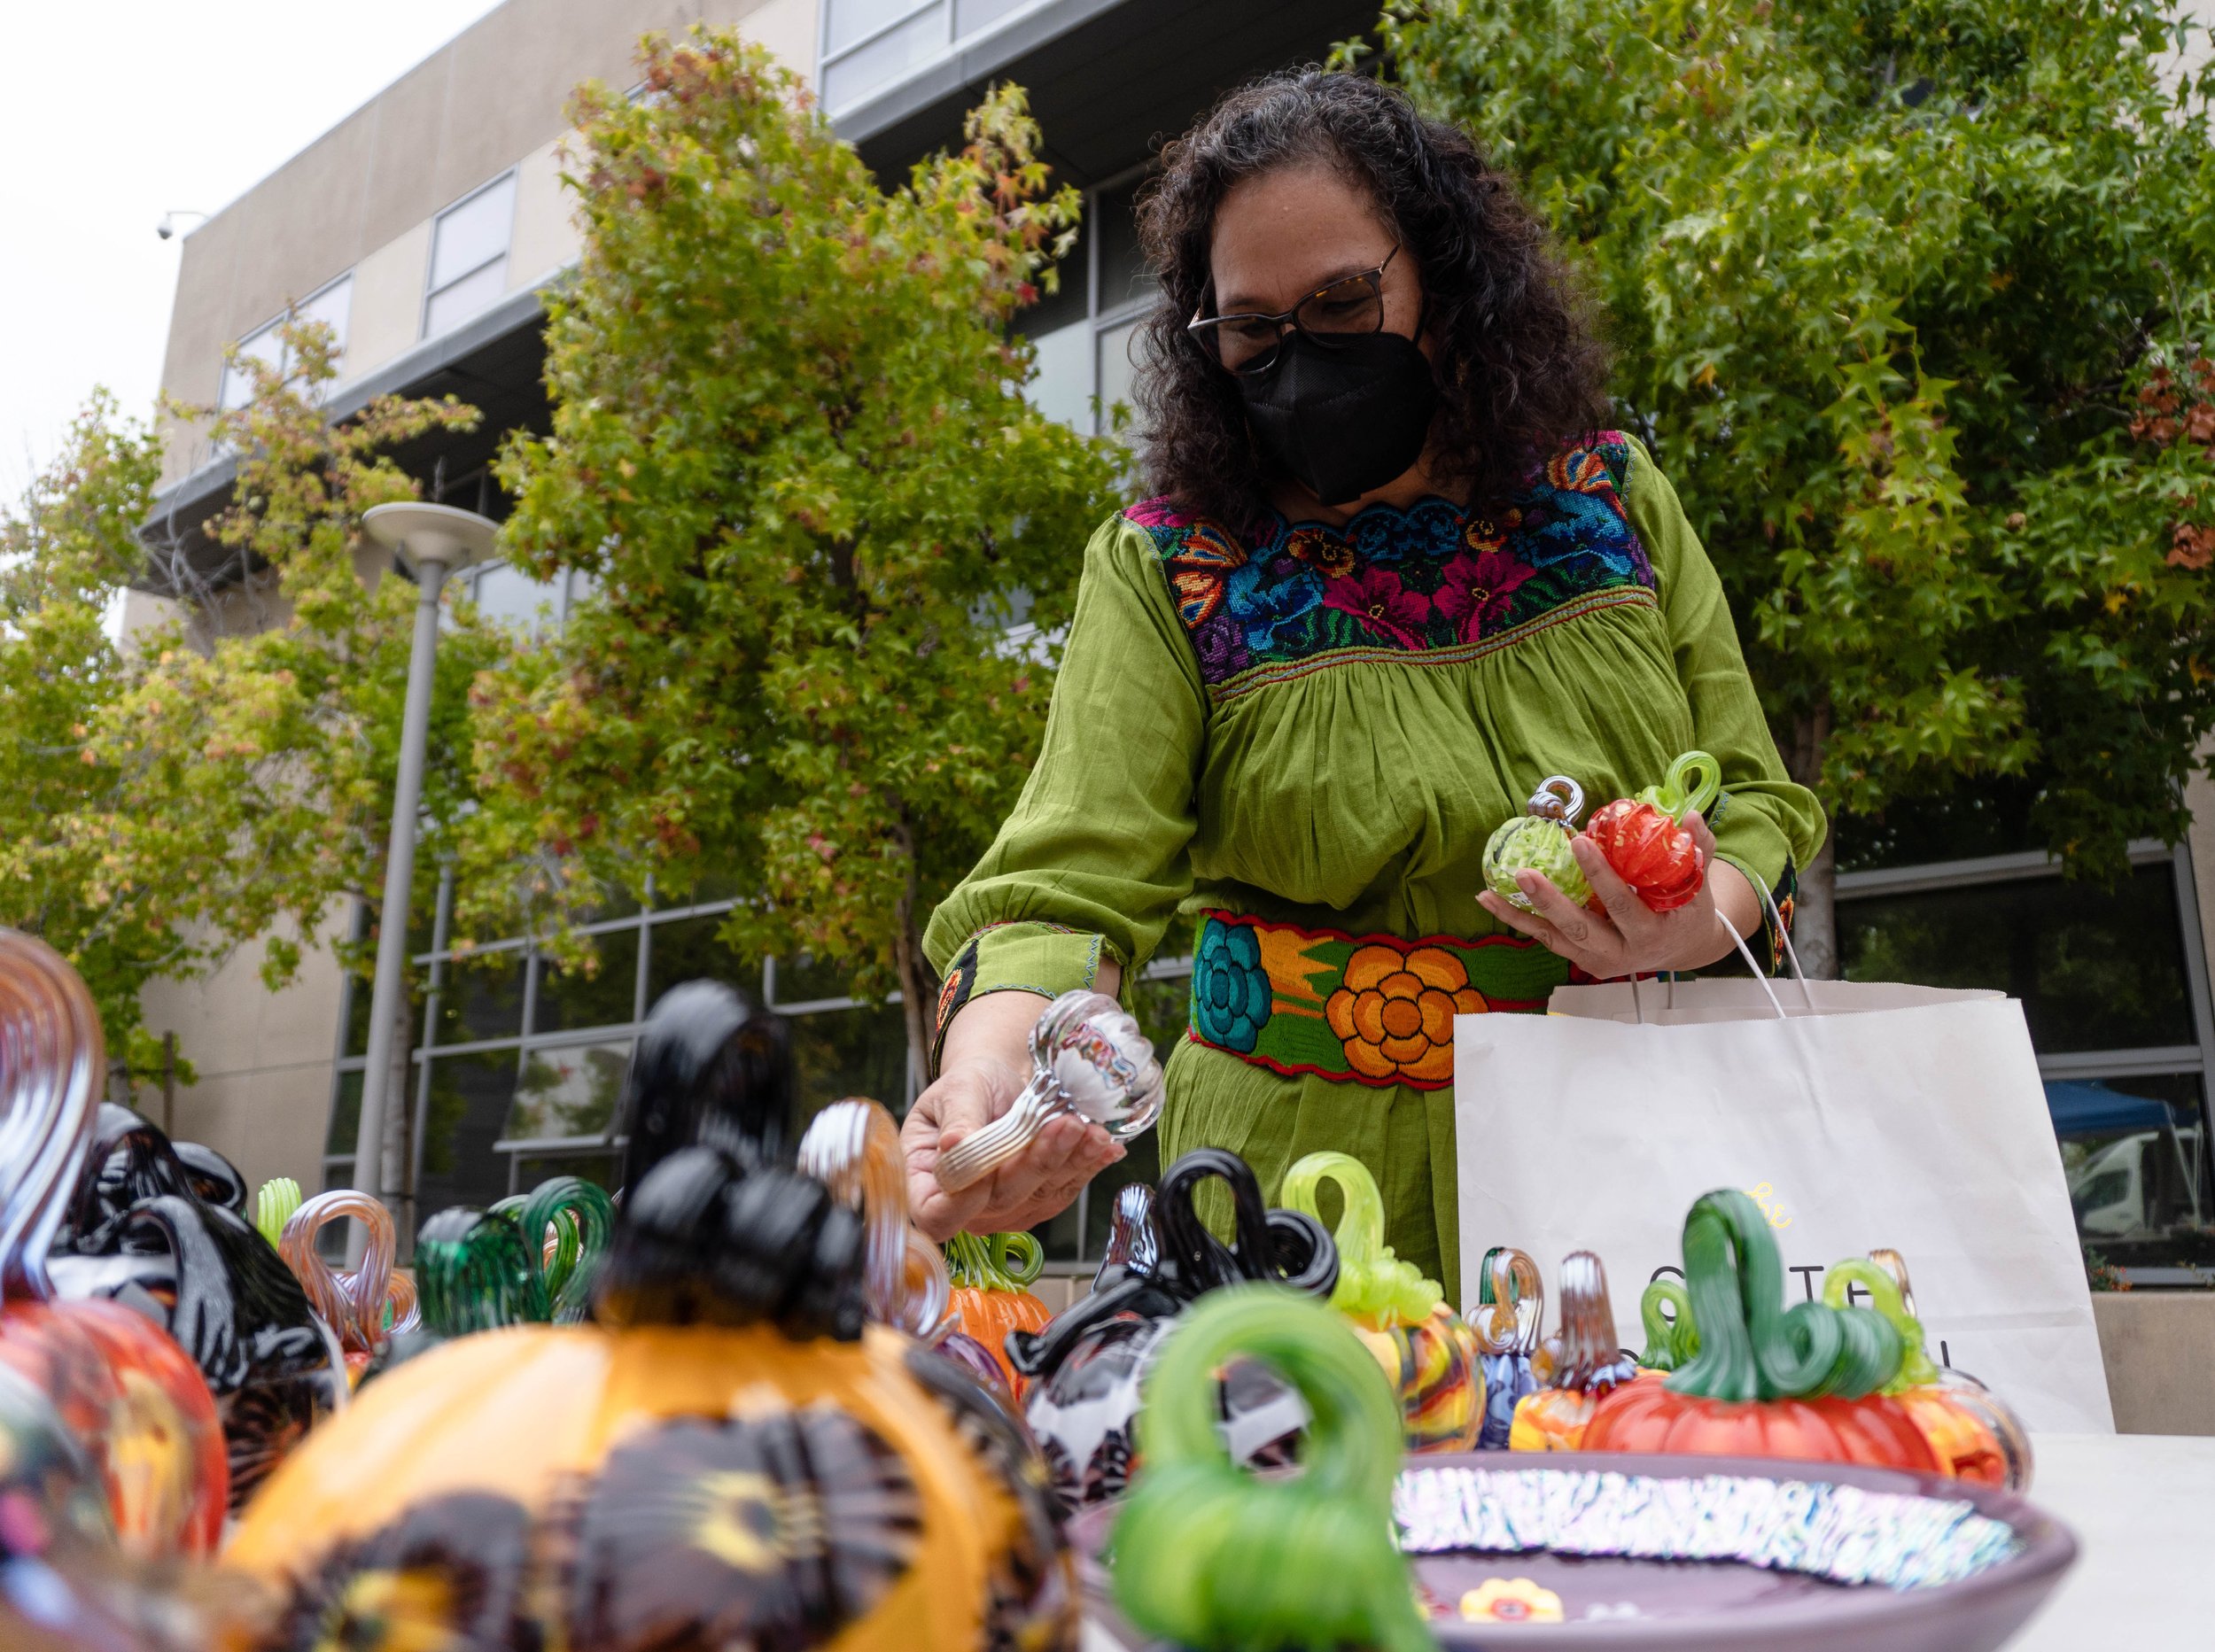  Maria Martinez, a counsellor at Santa Monica College looks for  6 glass pumpkins to gift each of her son's school teachers at the SMC Art Department's annual Glass Pumpkin Sales. Martinez has been giving out the Art Department's pumpkins as gifts to